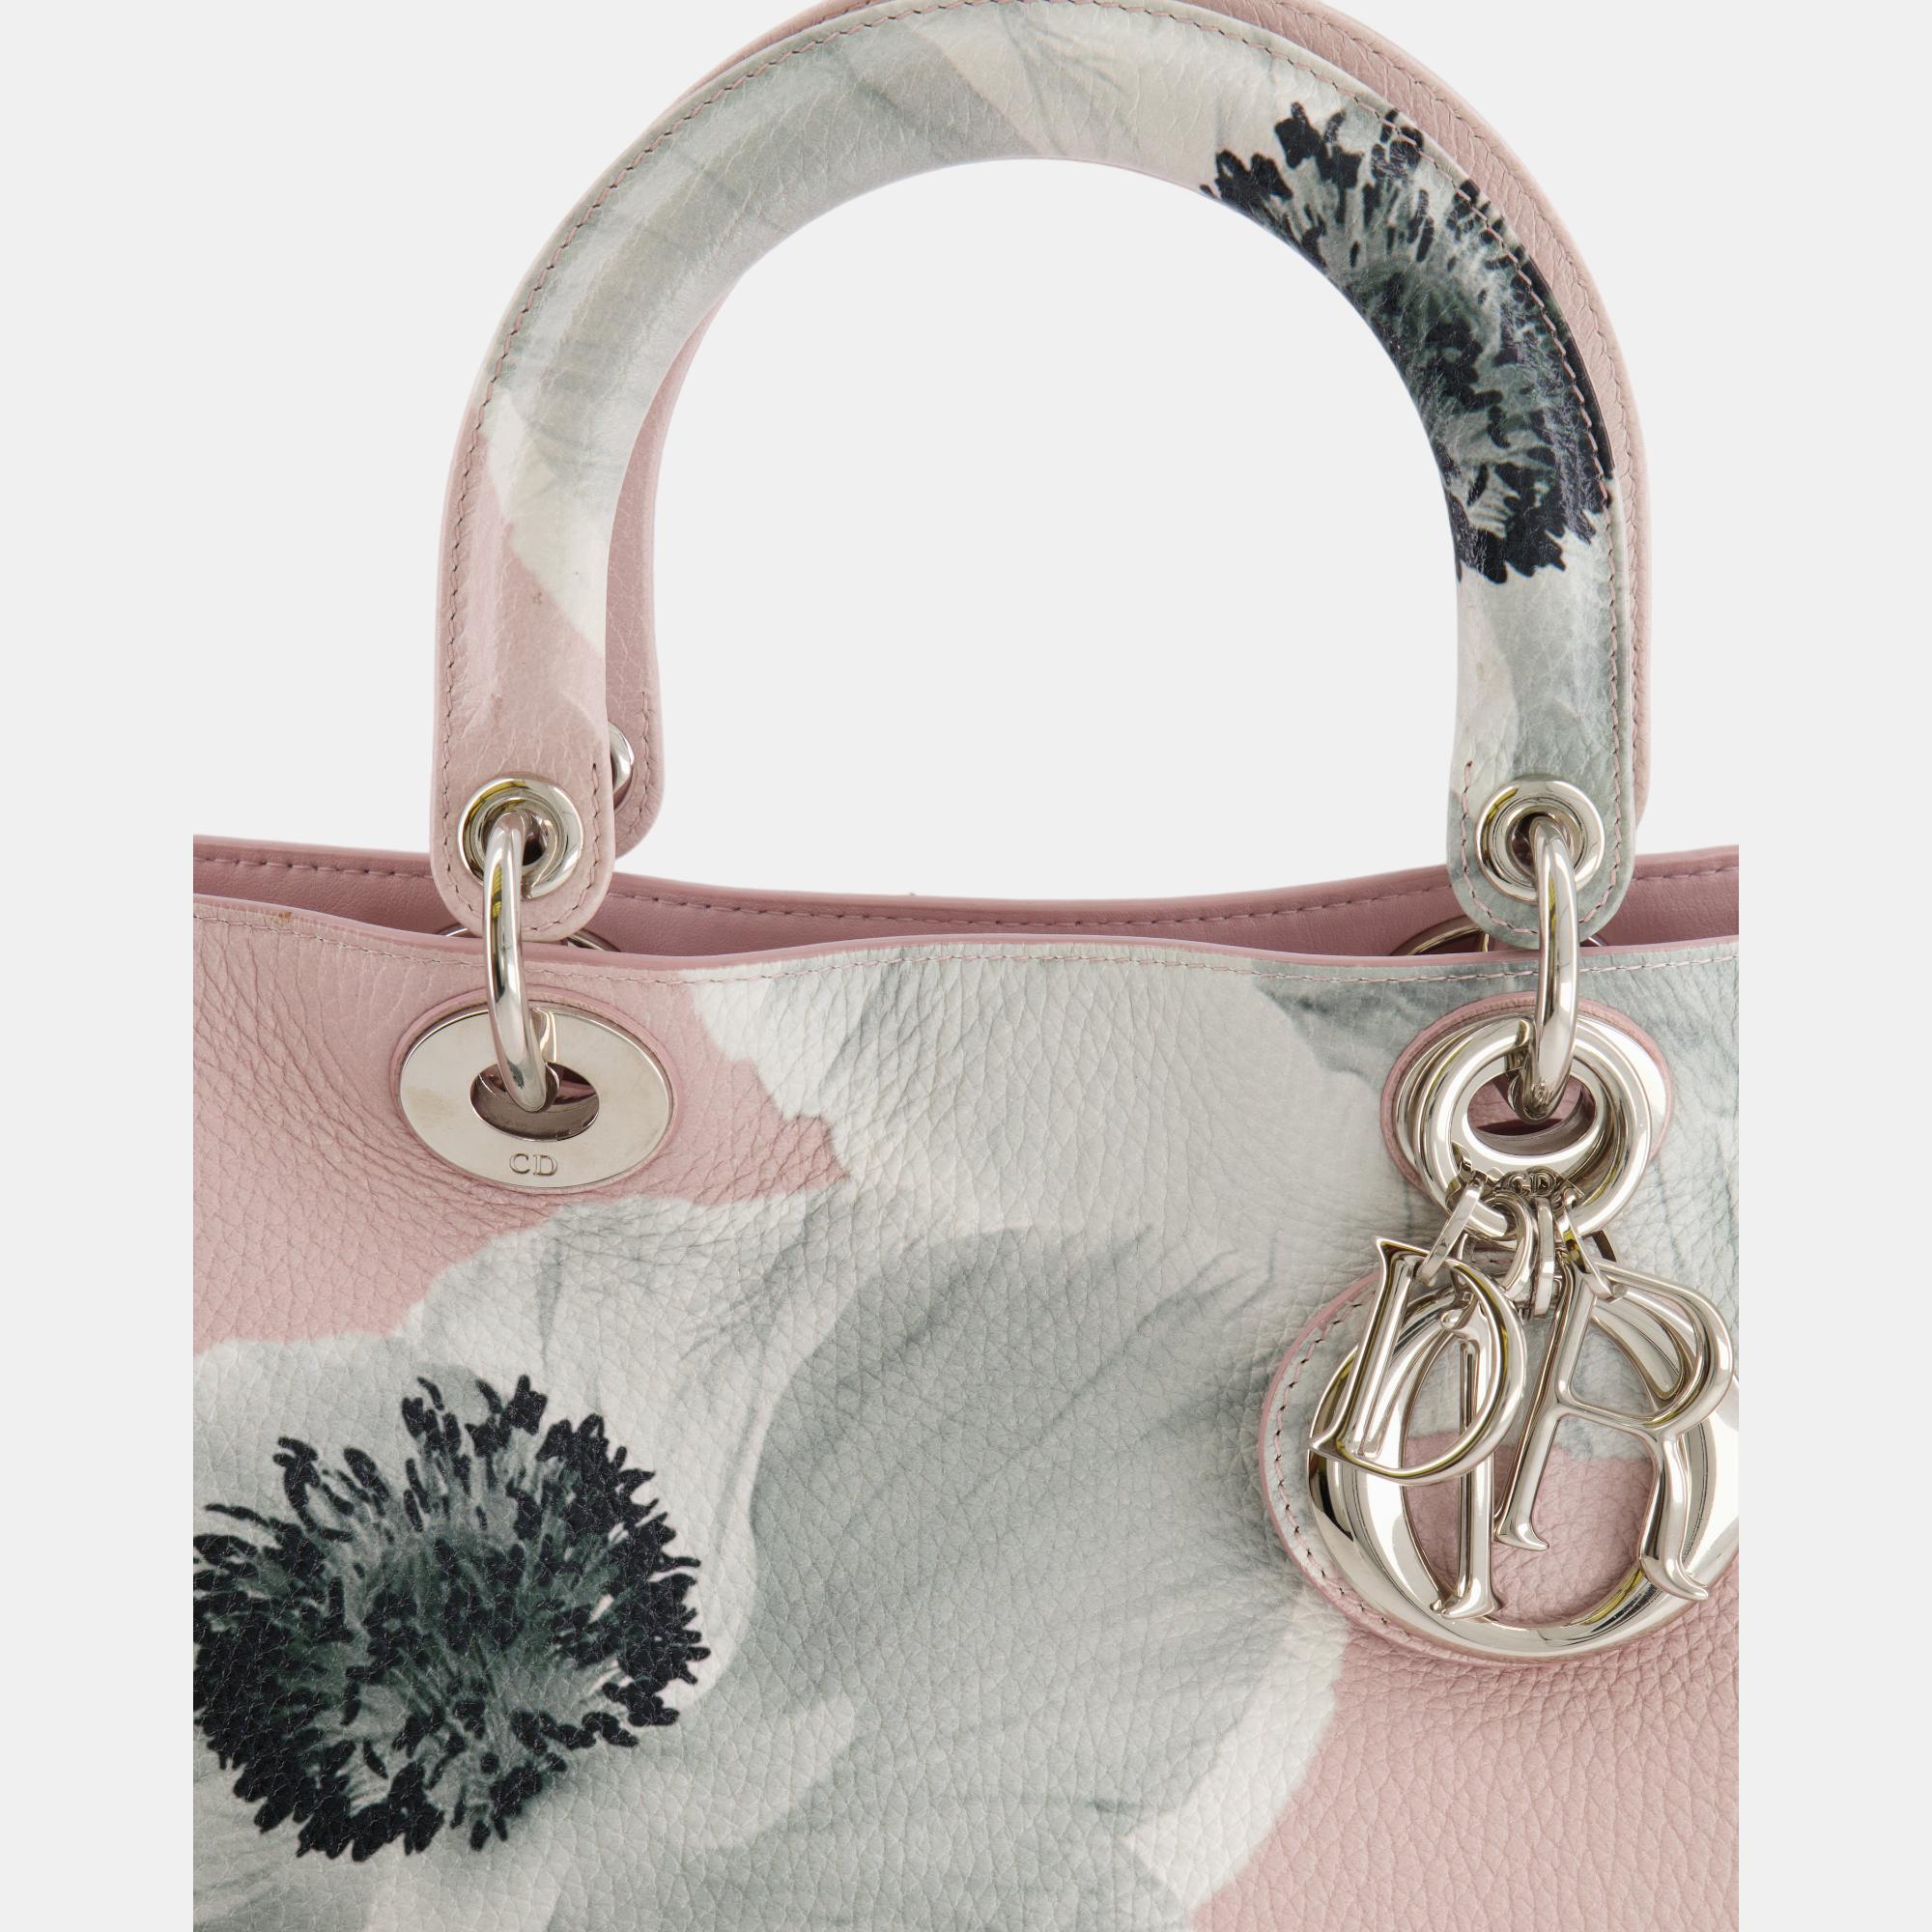 Christian Dior Light Pink And Grey Floral Diorissimo Bag With Silver Hardware